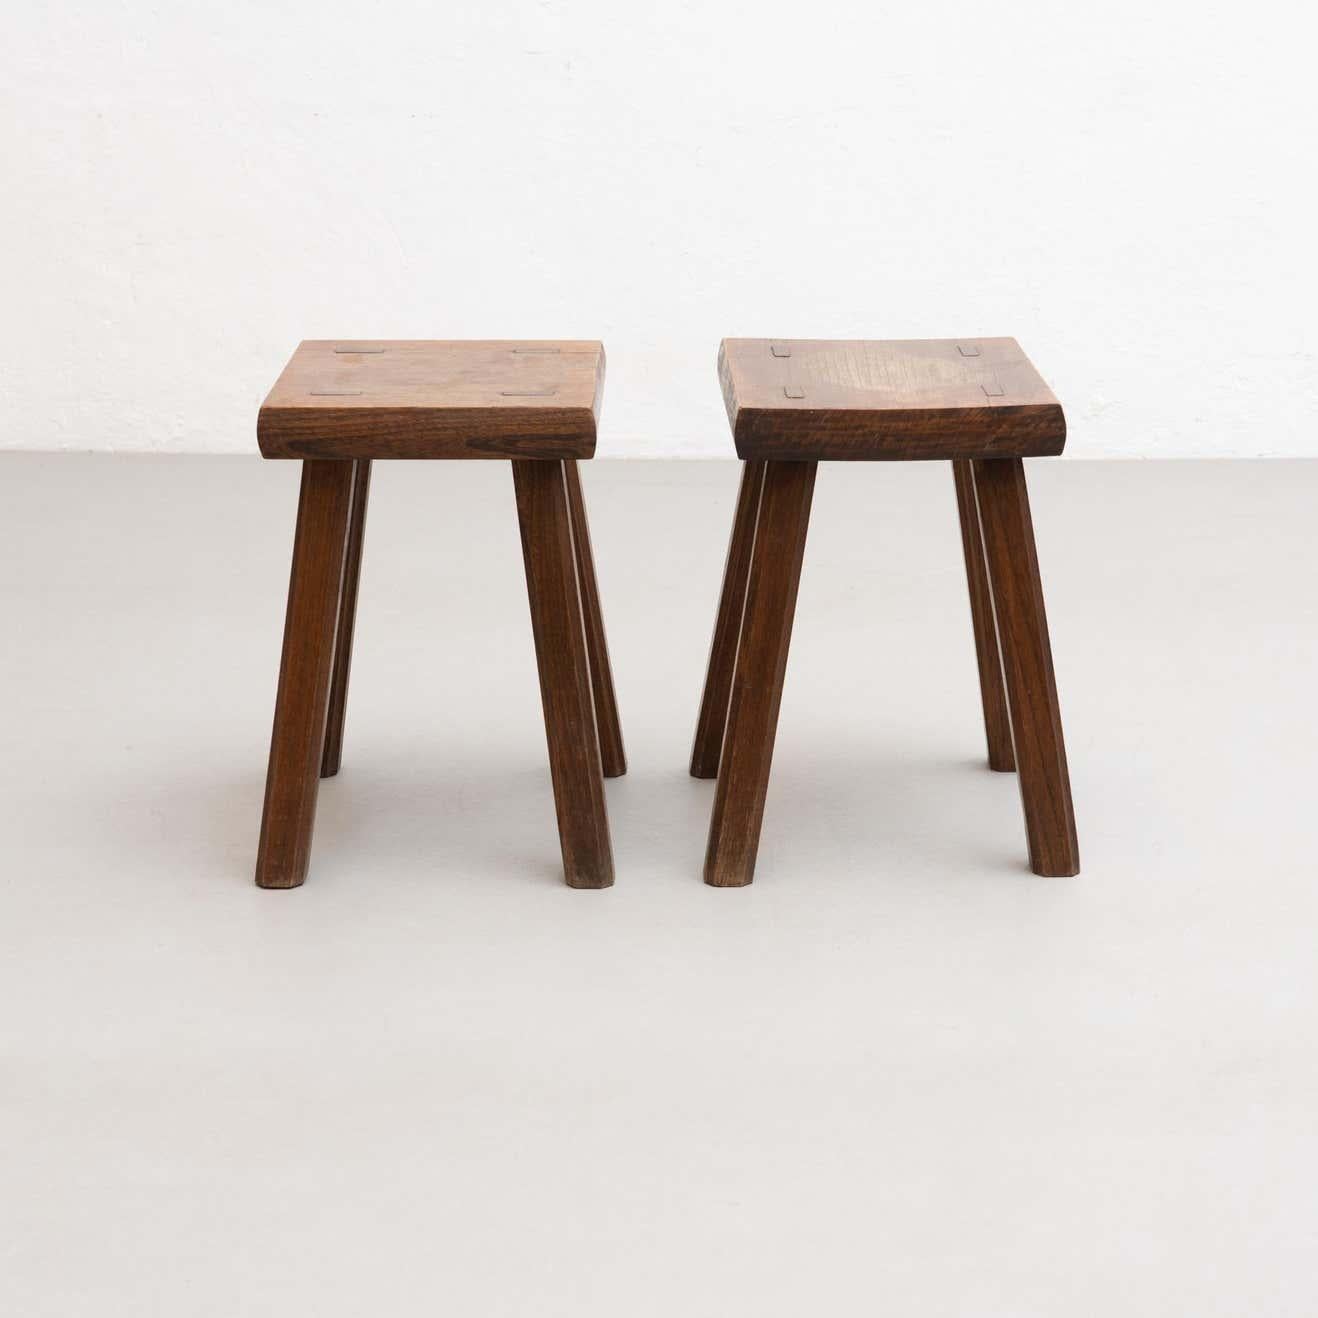 Set of two oak wood stools in style of Pierre Chapo.

Manufactured in France, circa 1960.

Material:
Solid oakwood.

Pierre Chapo is born in a family of craftsmen. After his regular studies, he worked in the workshop of a navy carpenter. He was